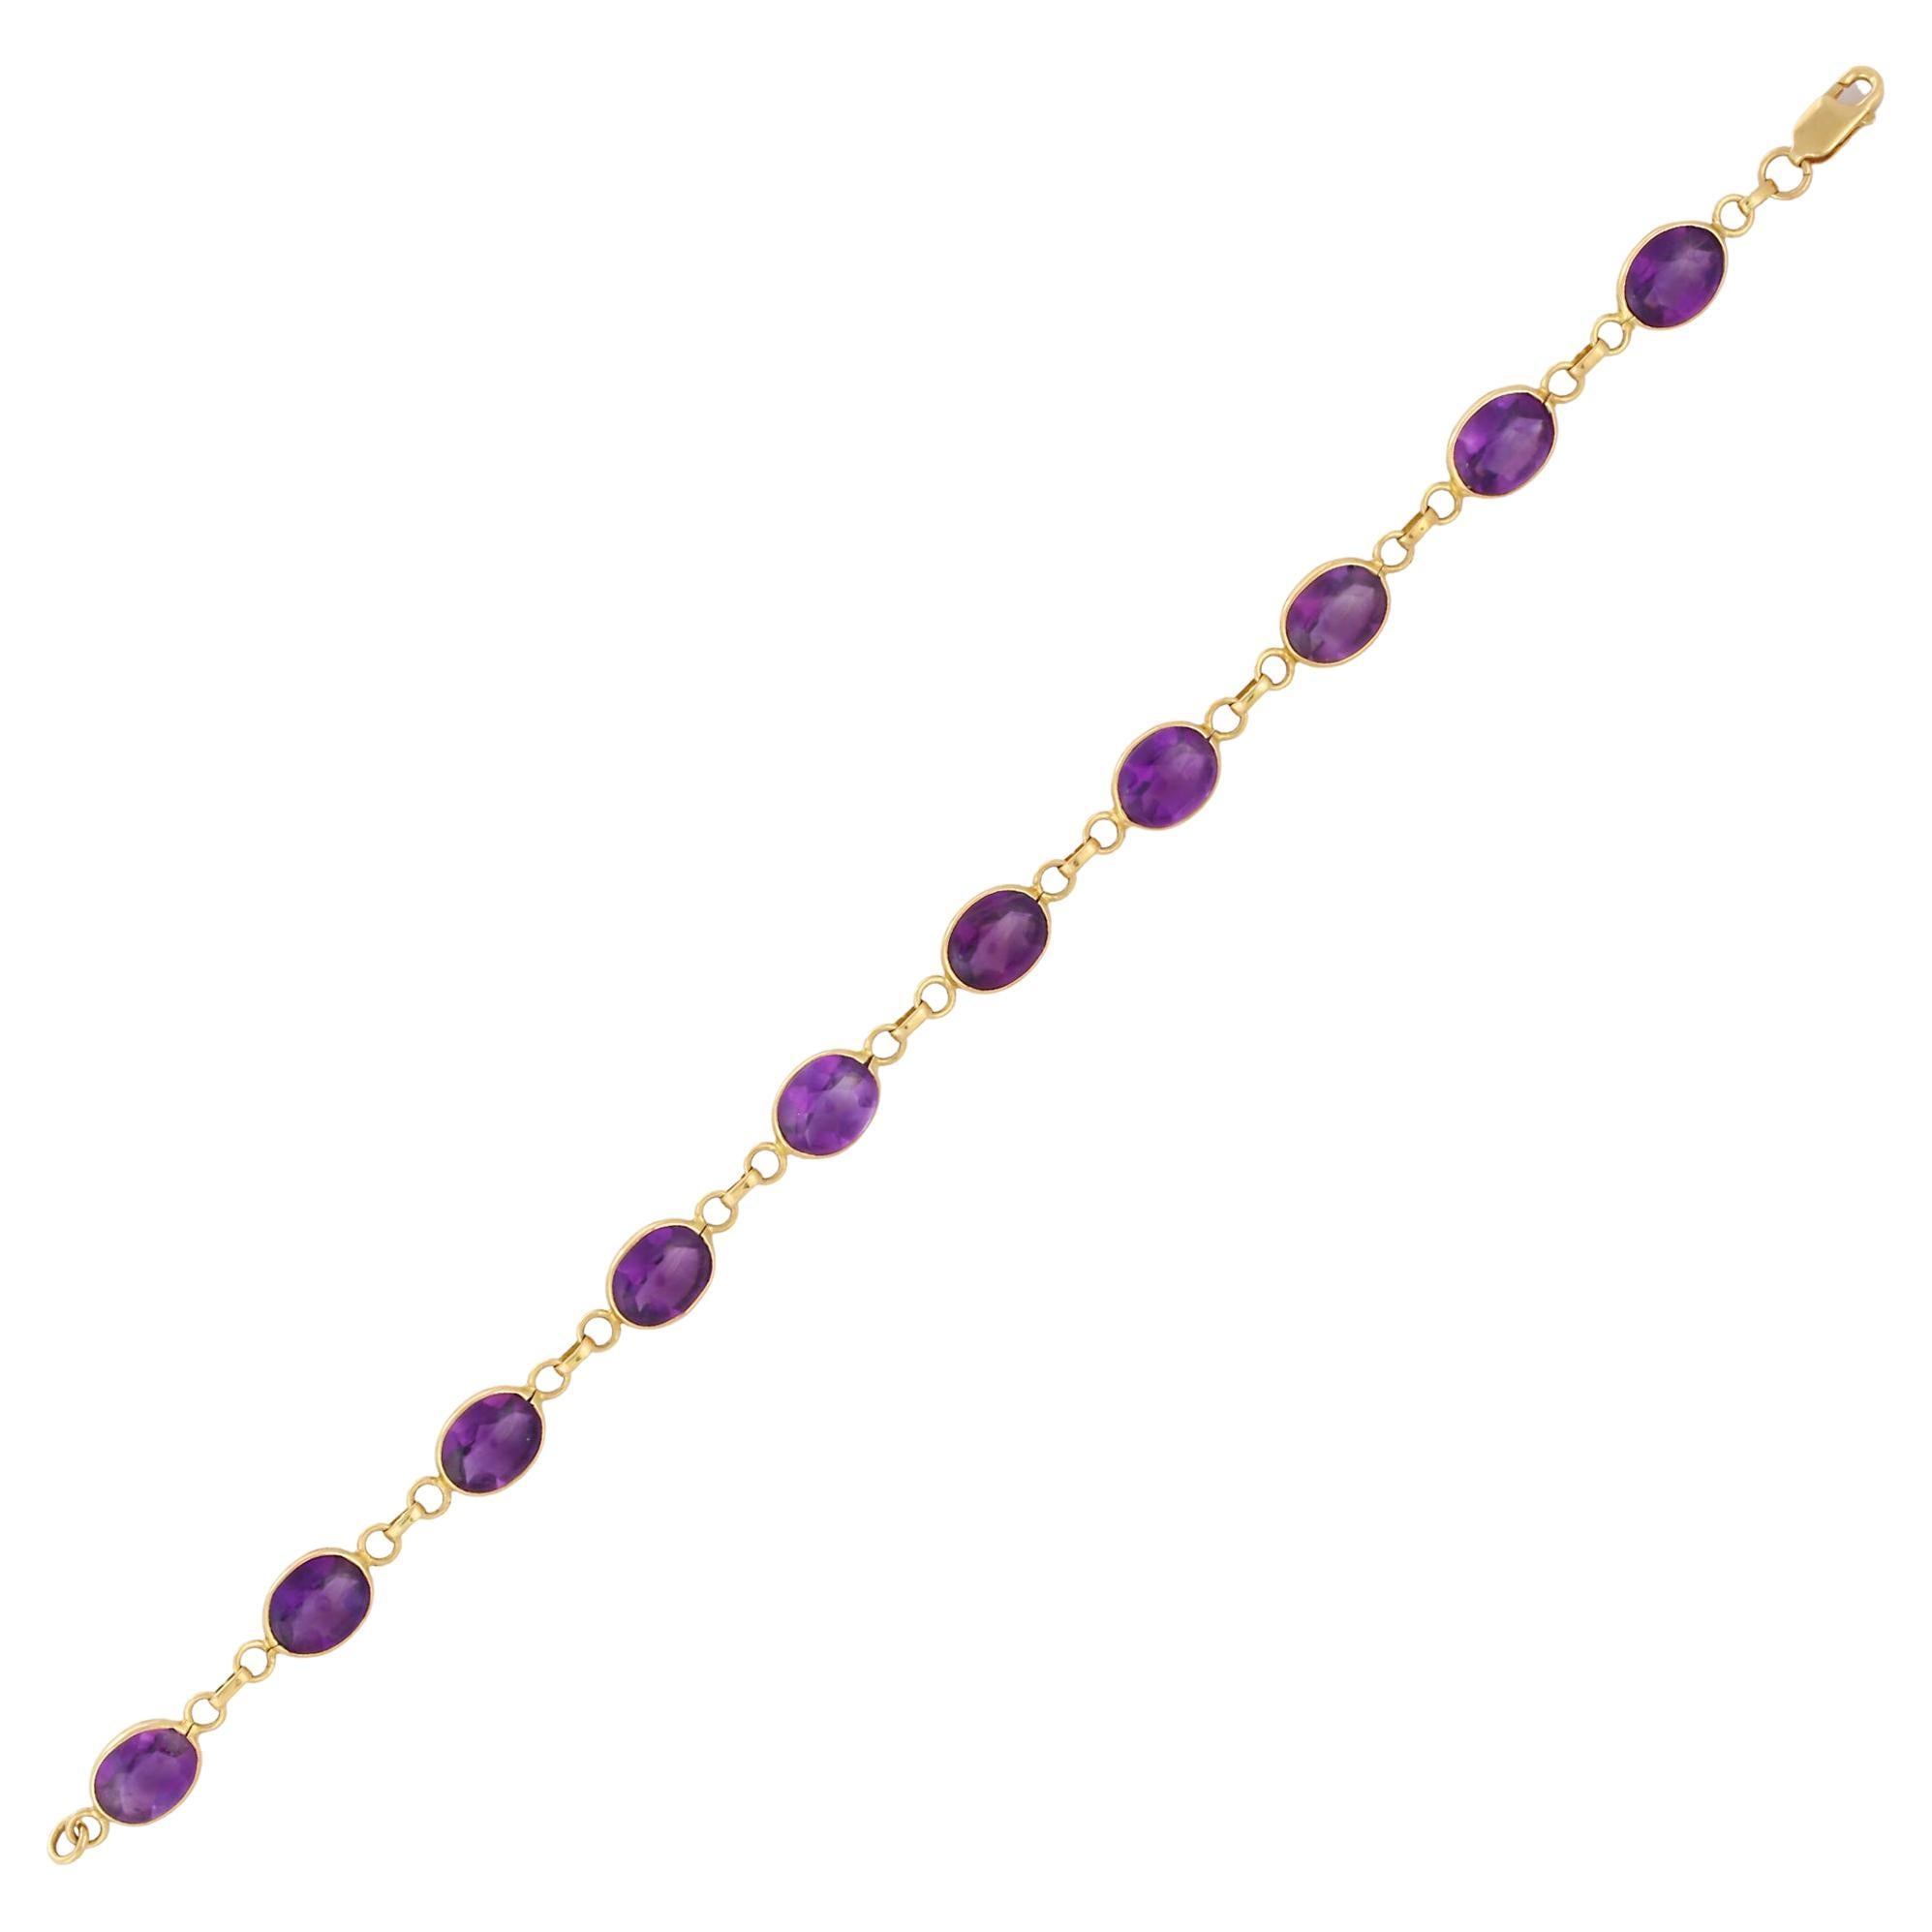 Bracelets are worn to enhance the look. Women love to look good. It is common to see a woman rocking a lovely gold bracelet on her wrist. A gold gemstone bracelet is the ultimate statement piece for every stylish woman. Lightweight and gorgeous,